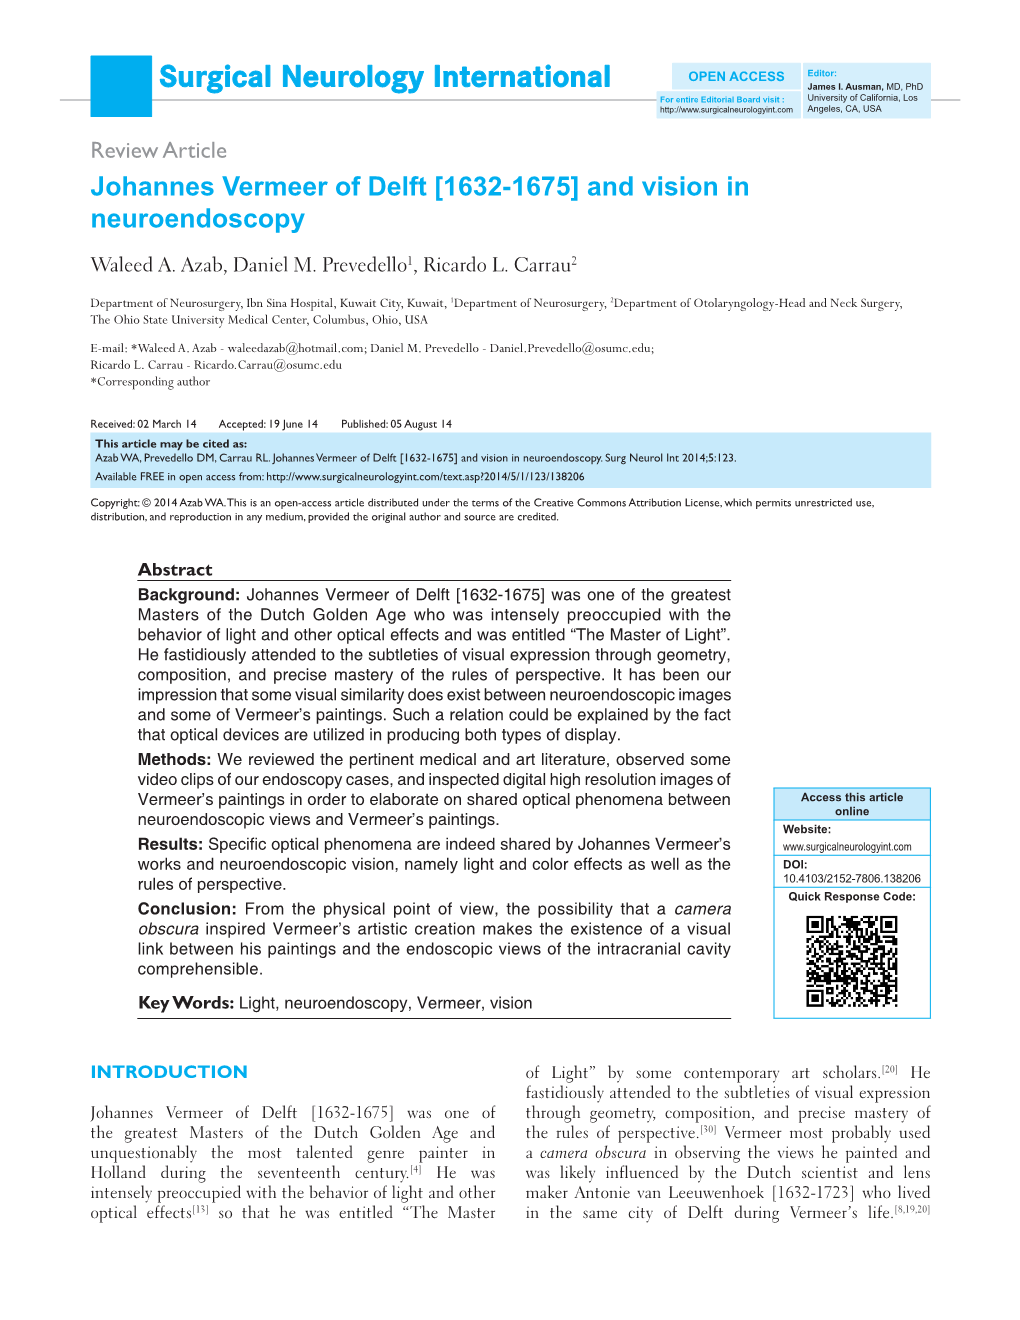 Johannes Vermeer of Delft [1632-1675] and Vision in Neuroendoscopy Waleed A